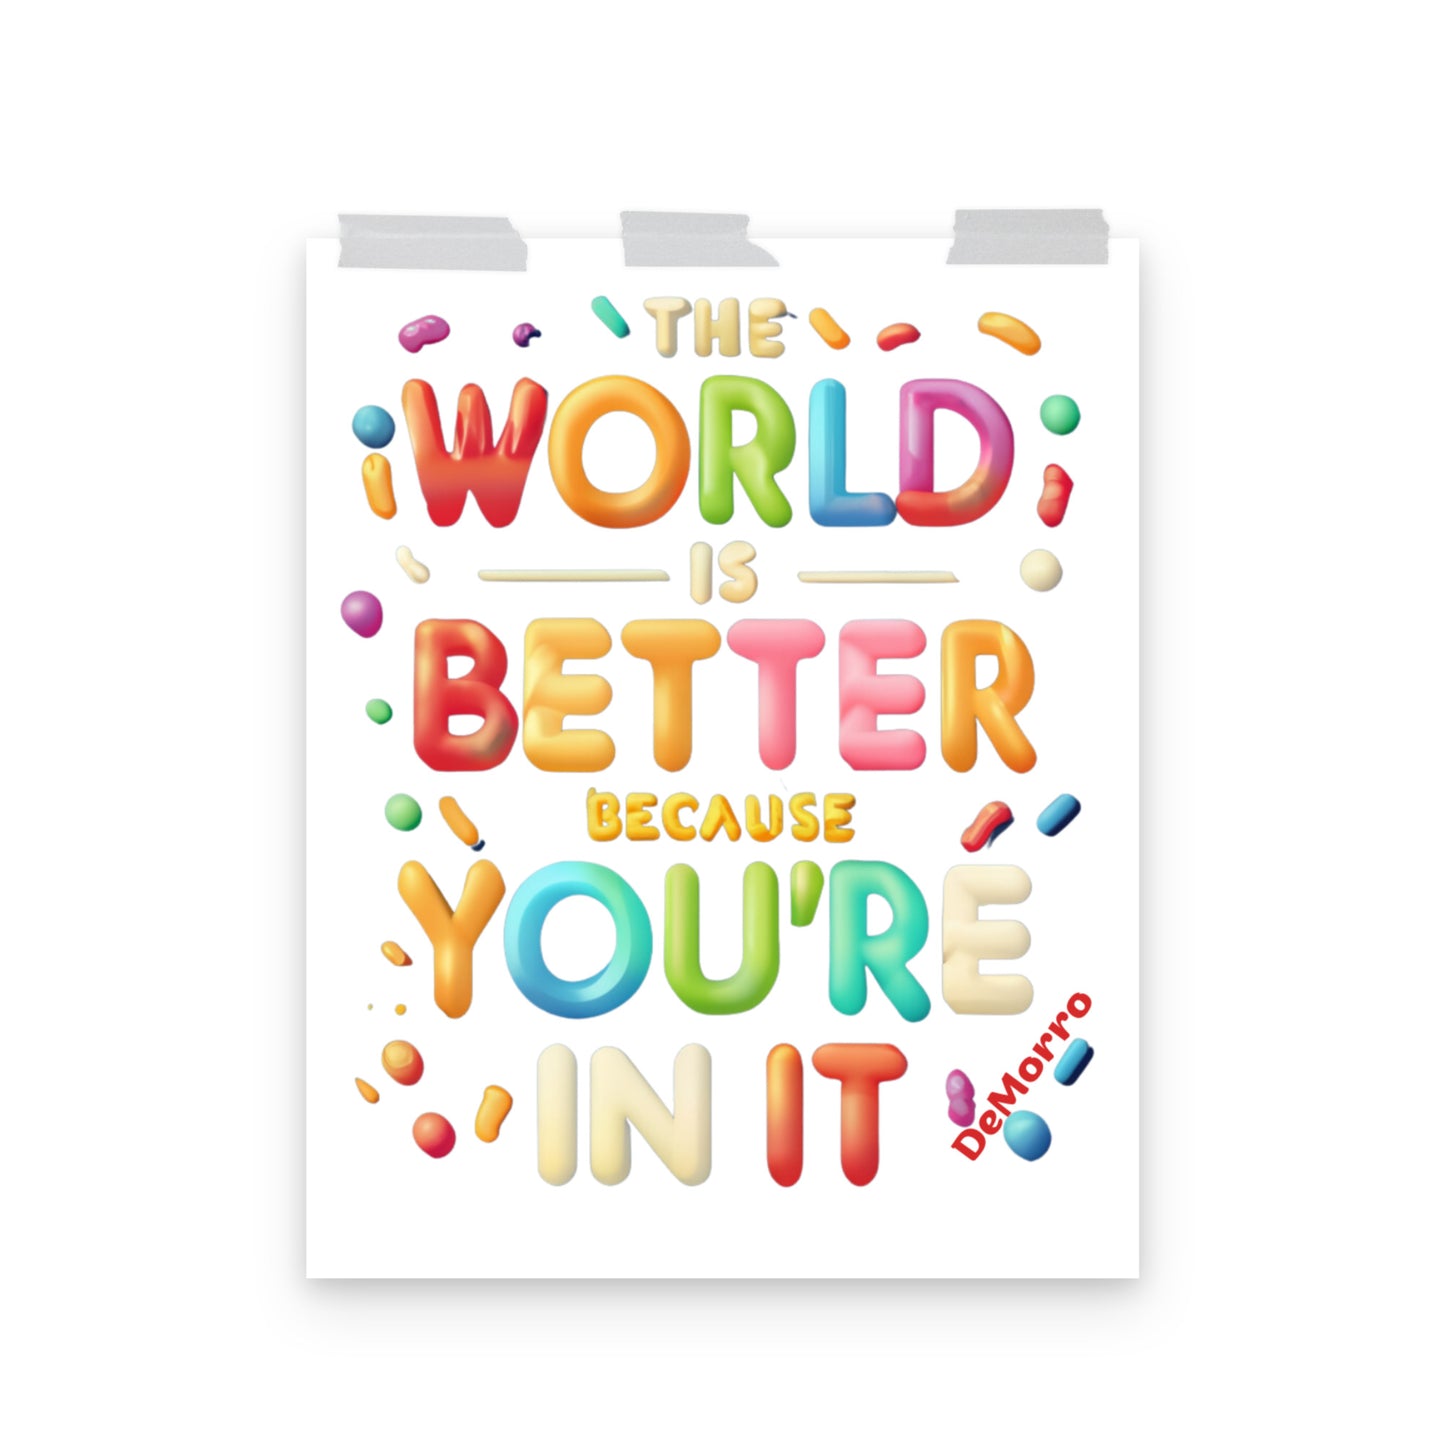 "Better With You" - 16inx20in Poster